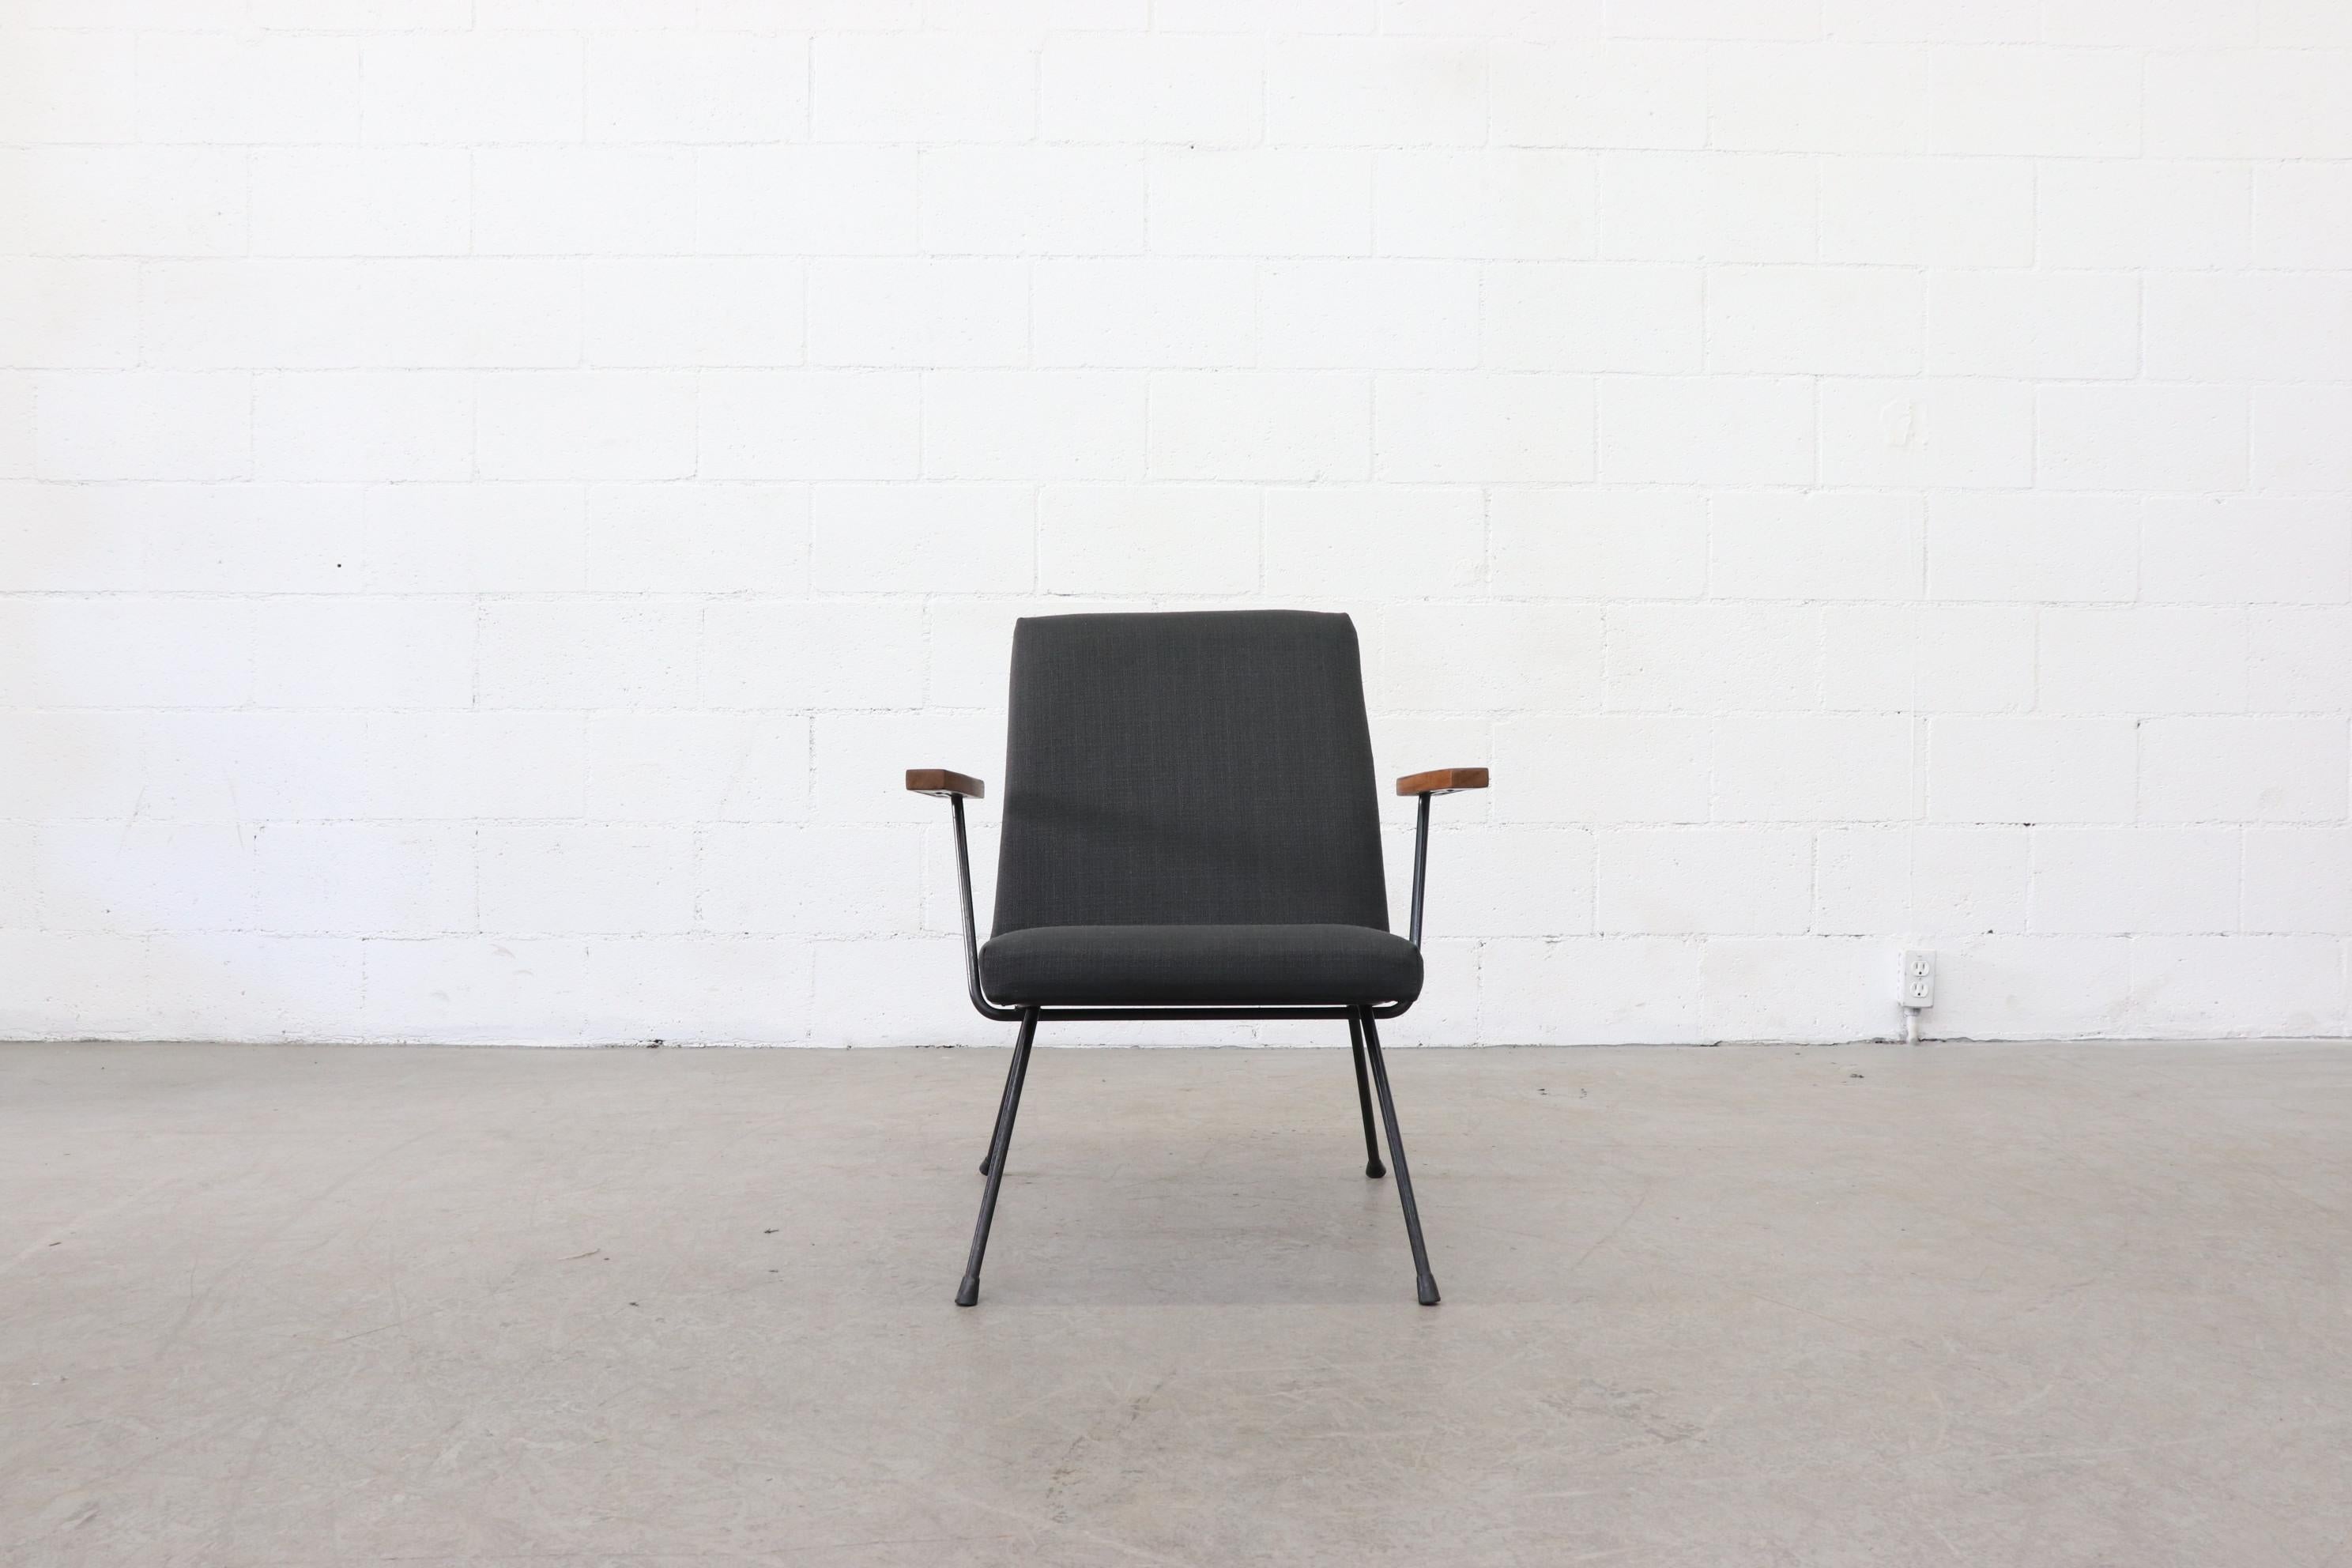 Gispen 1409 lounge chair with arms. This chair is from a Line Made Specifically for A.P.S.A.Z. (Aigemeen Provinciaal Stad + Academisch Ziekenhuis) or (General Provincial + City Academic Hospital) in Groningen, Netherlands. Original Manufacturers Tag